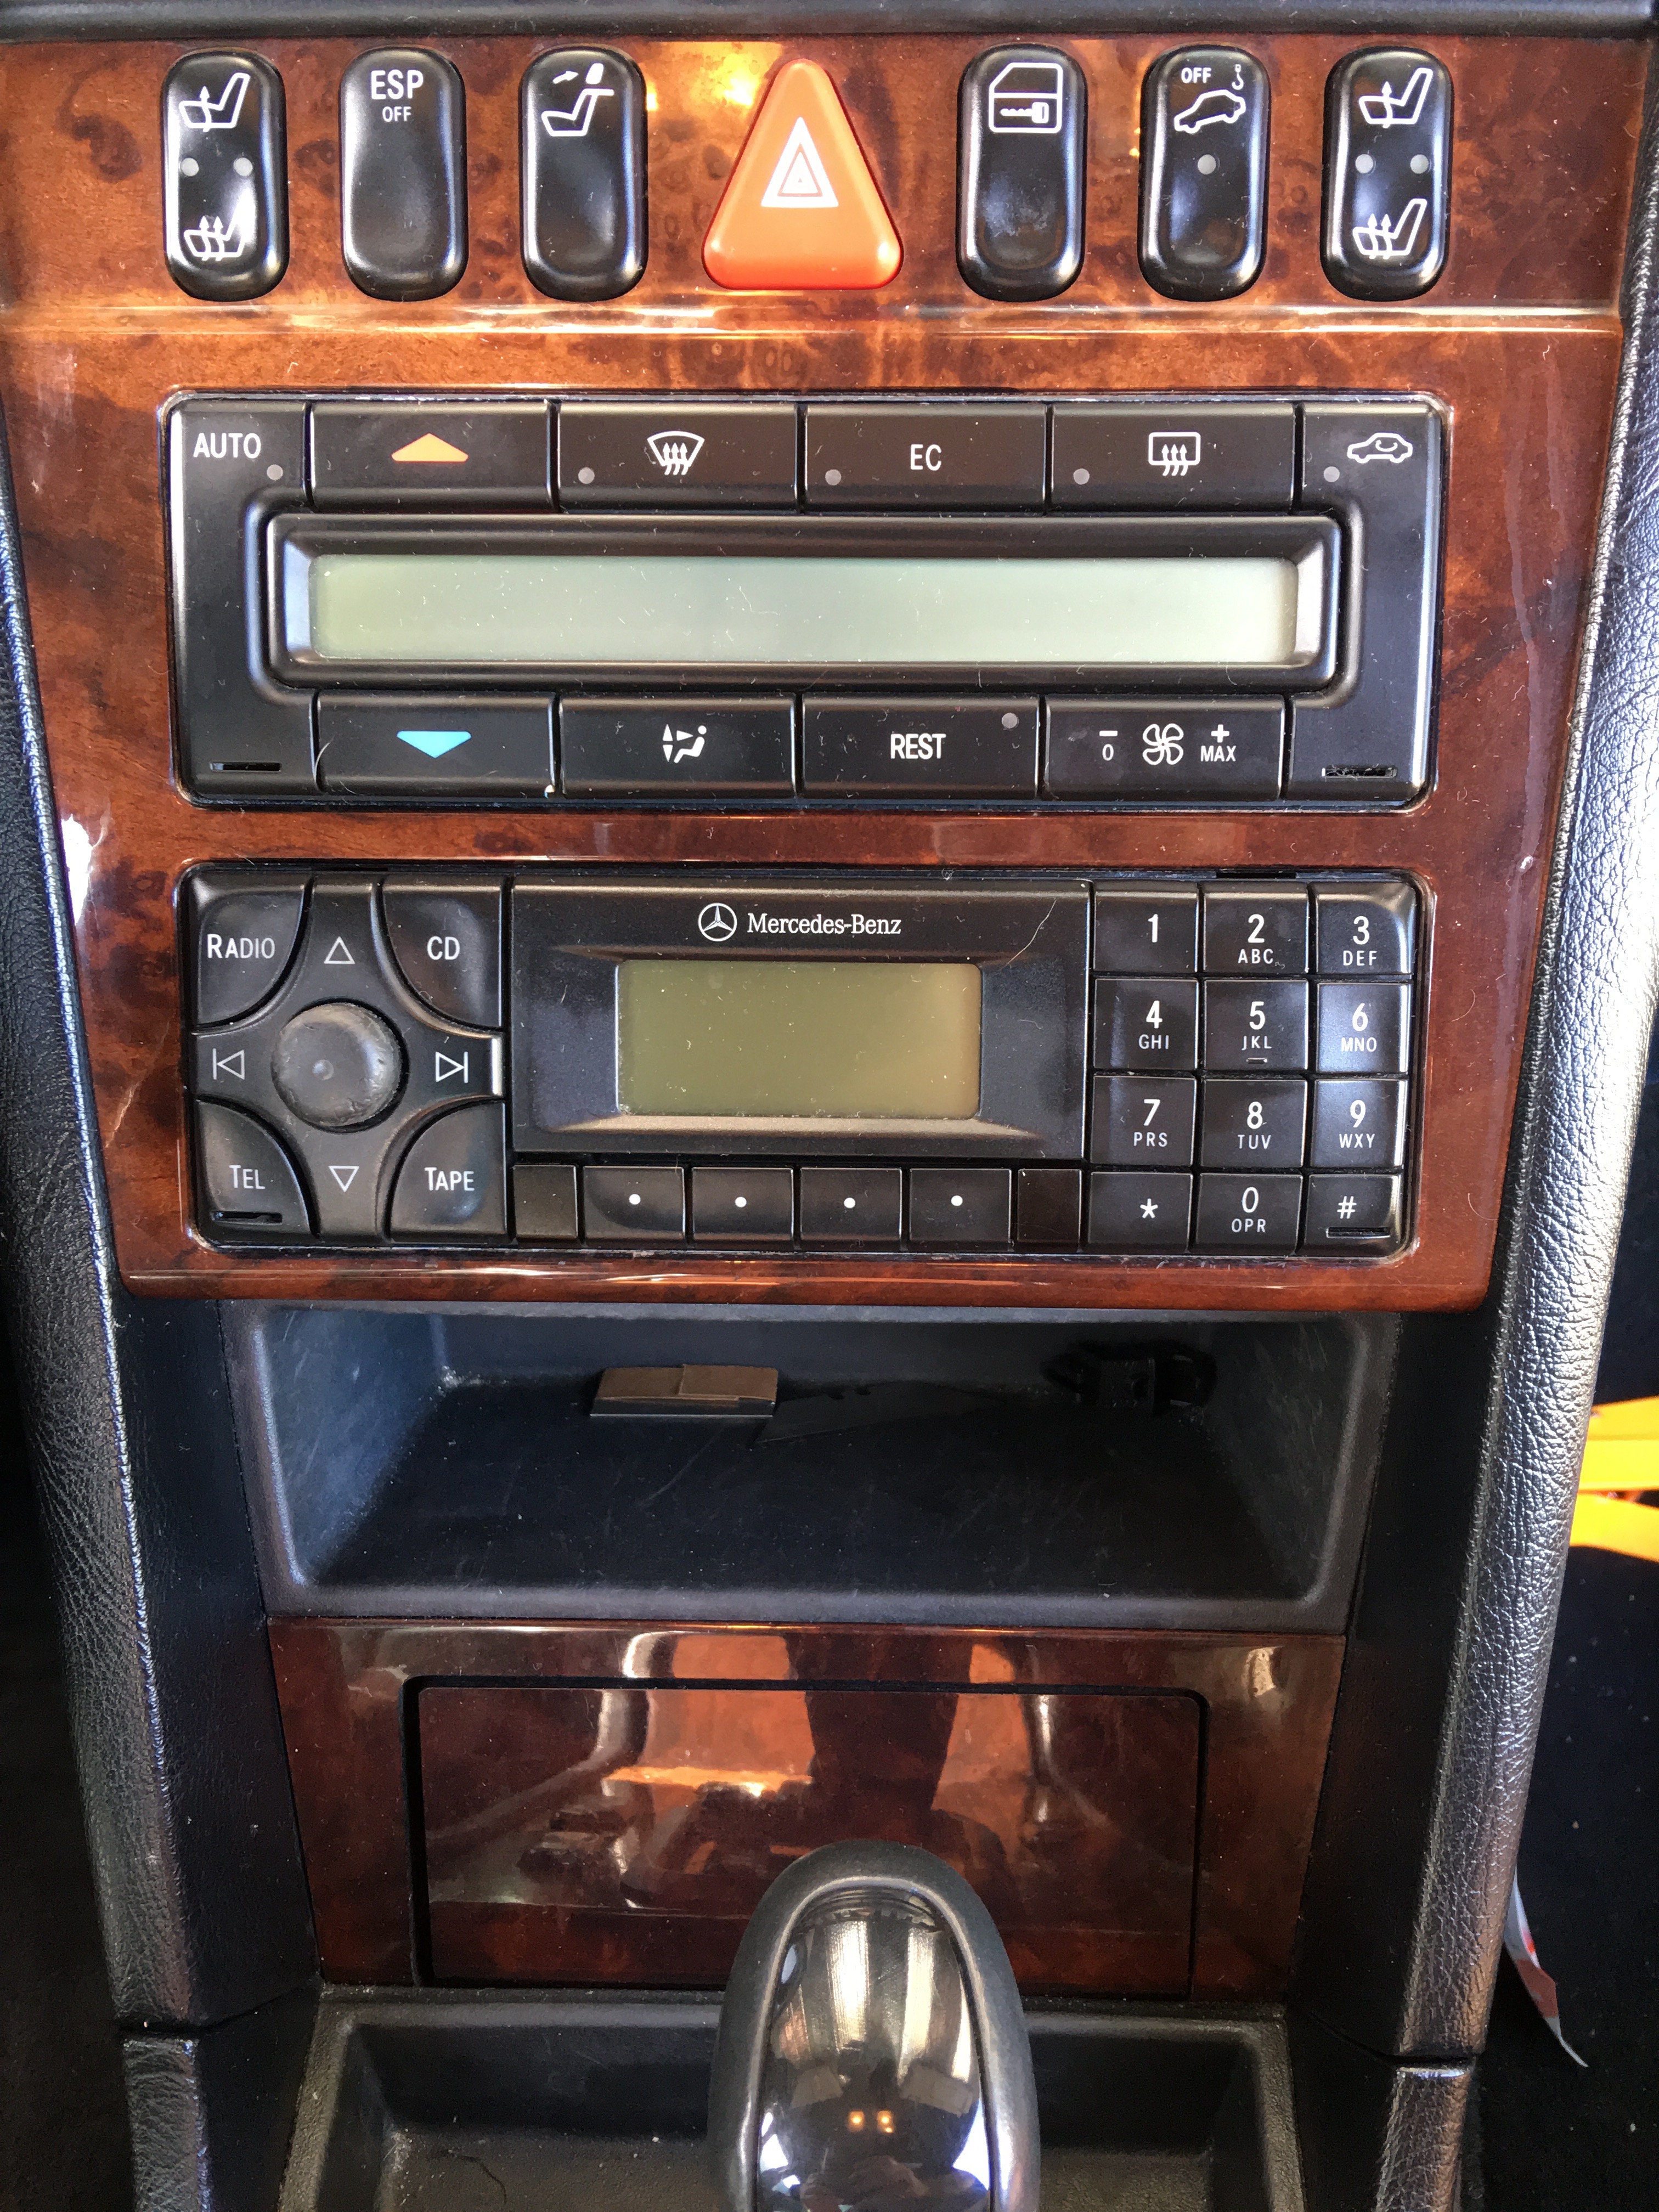 New double Din Apple Radio install - MBWorld.org Forums wiring diagram for kenwood stereo 